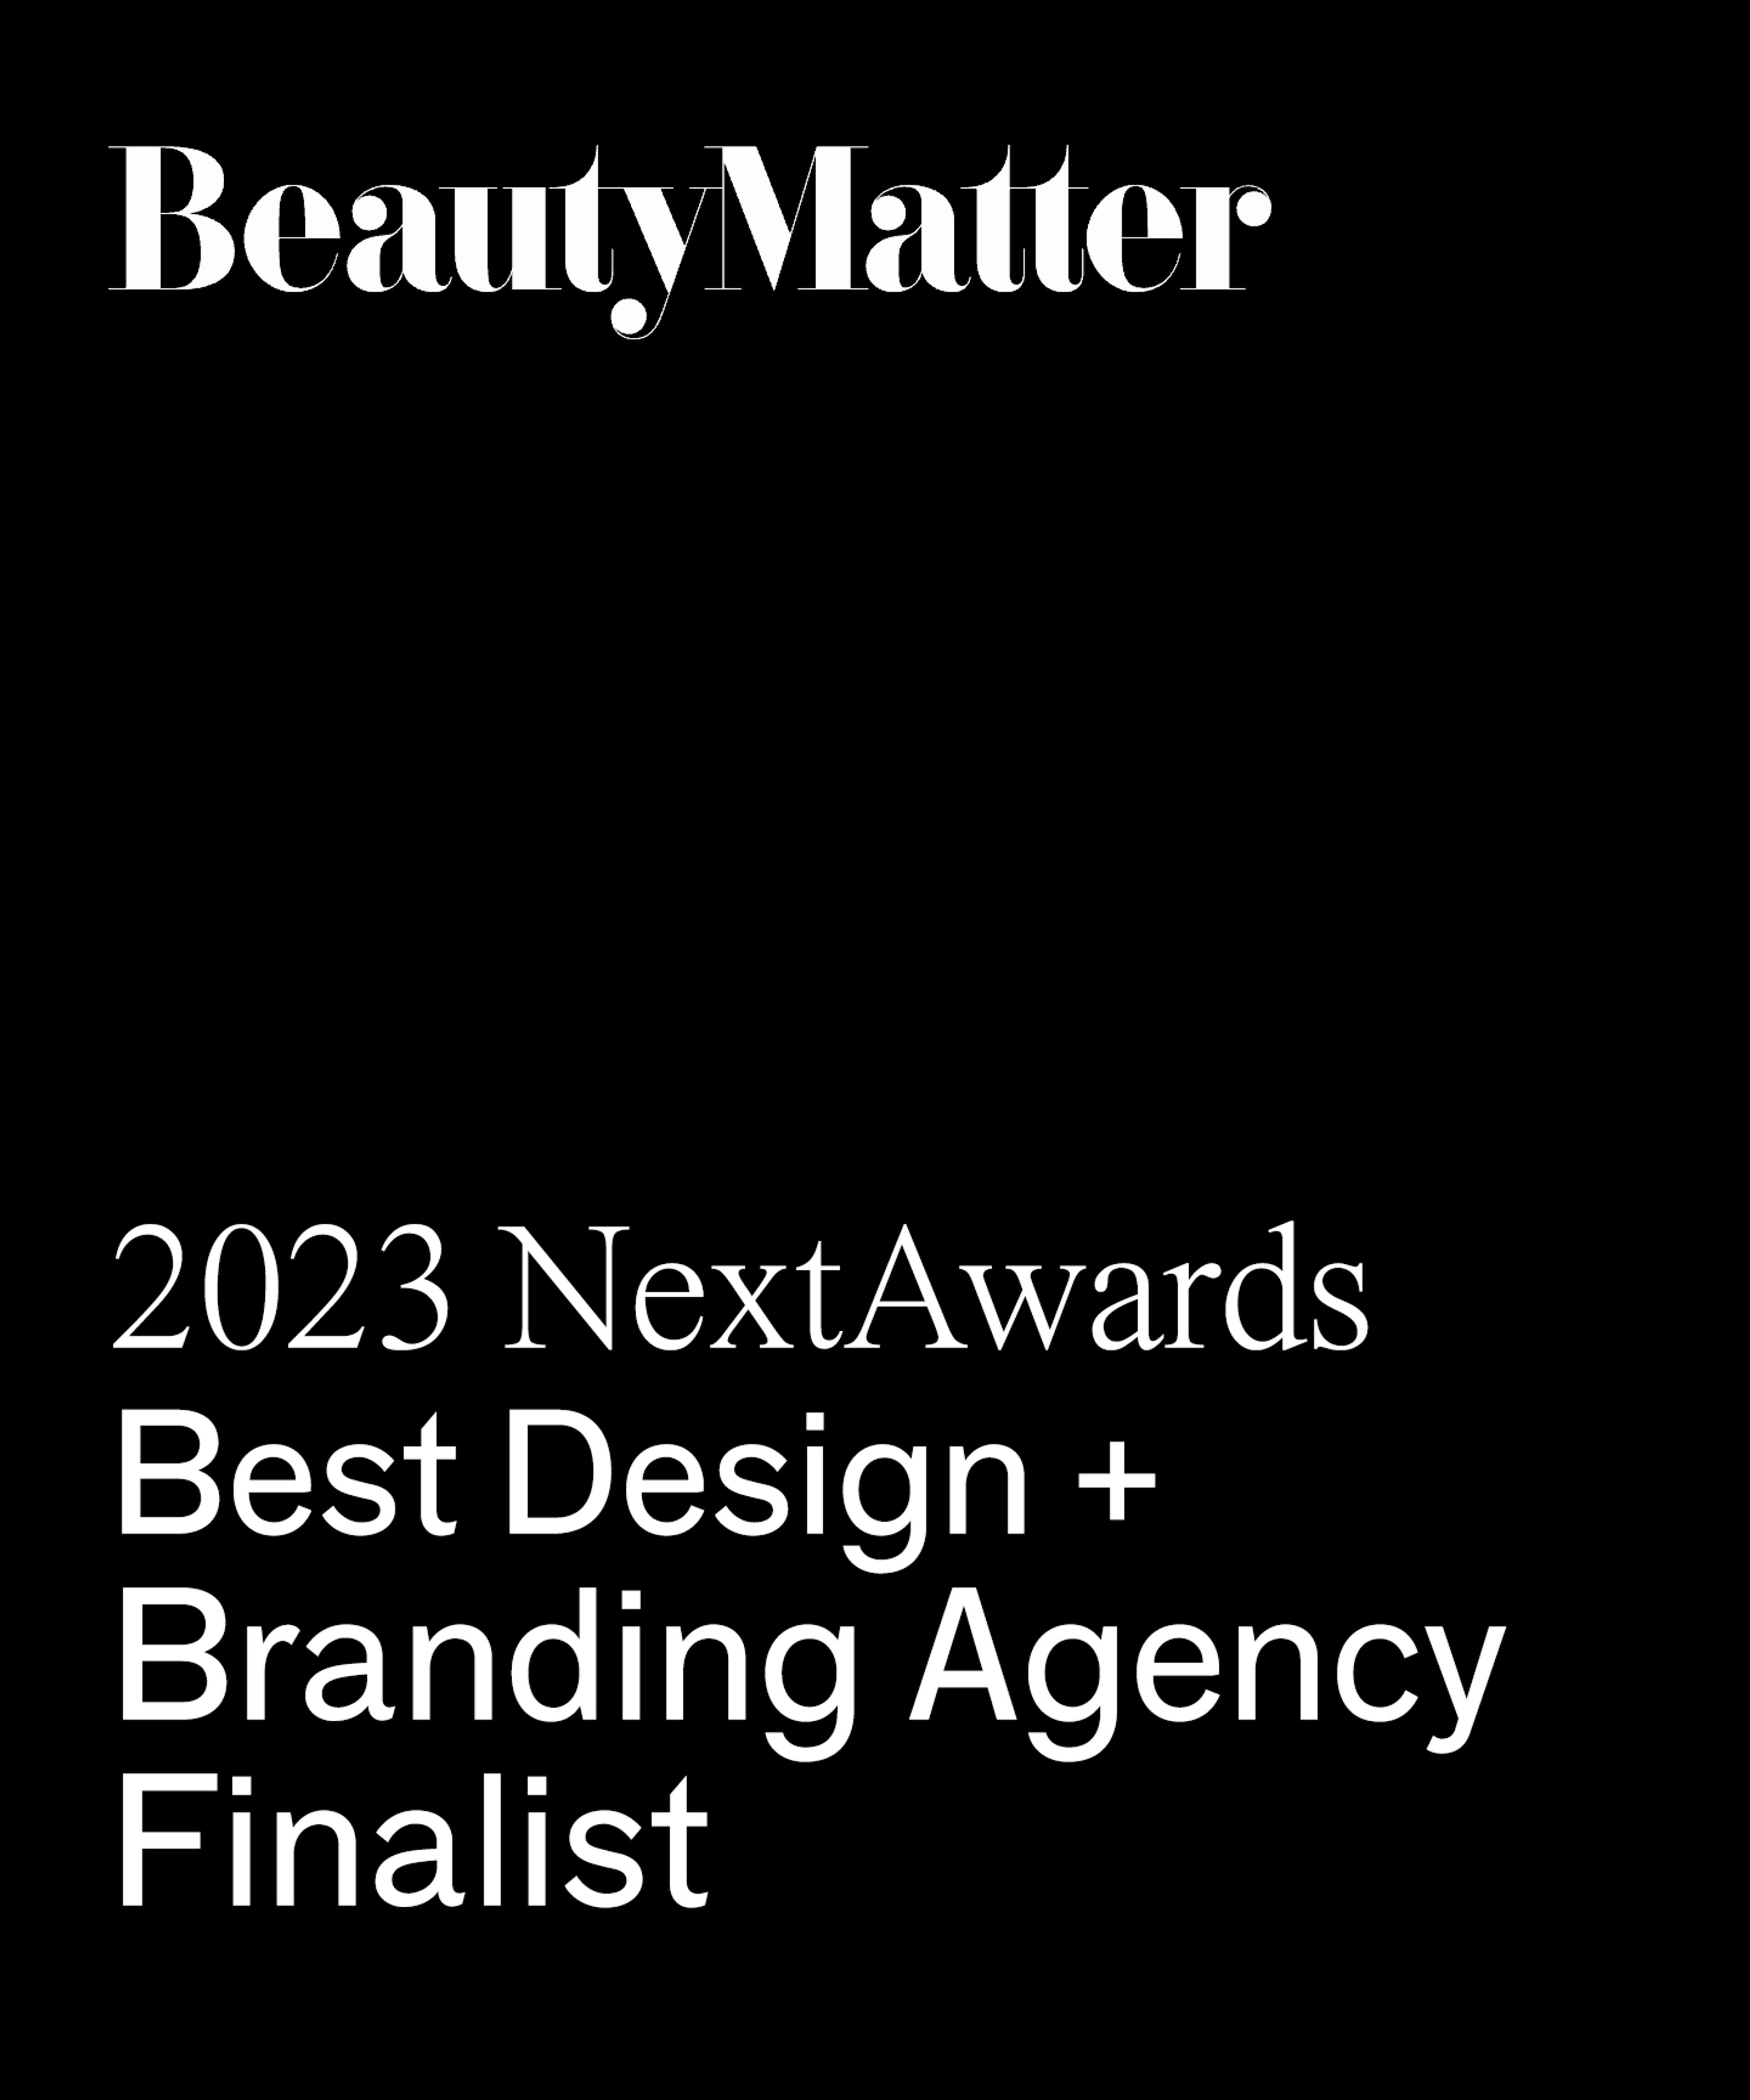 1R Selected for 2023 NextAwards Finalist